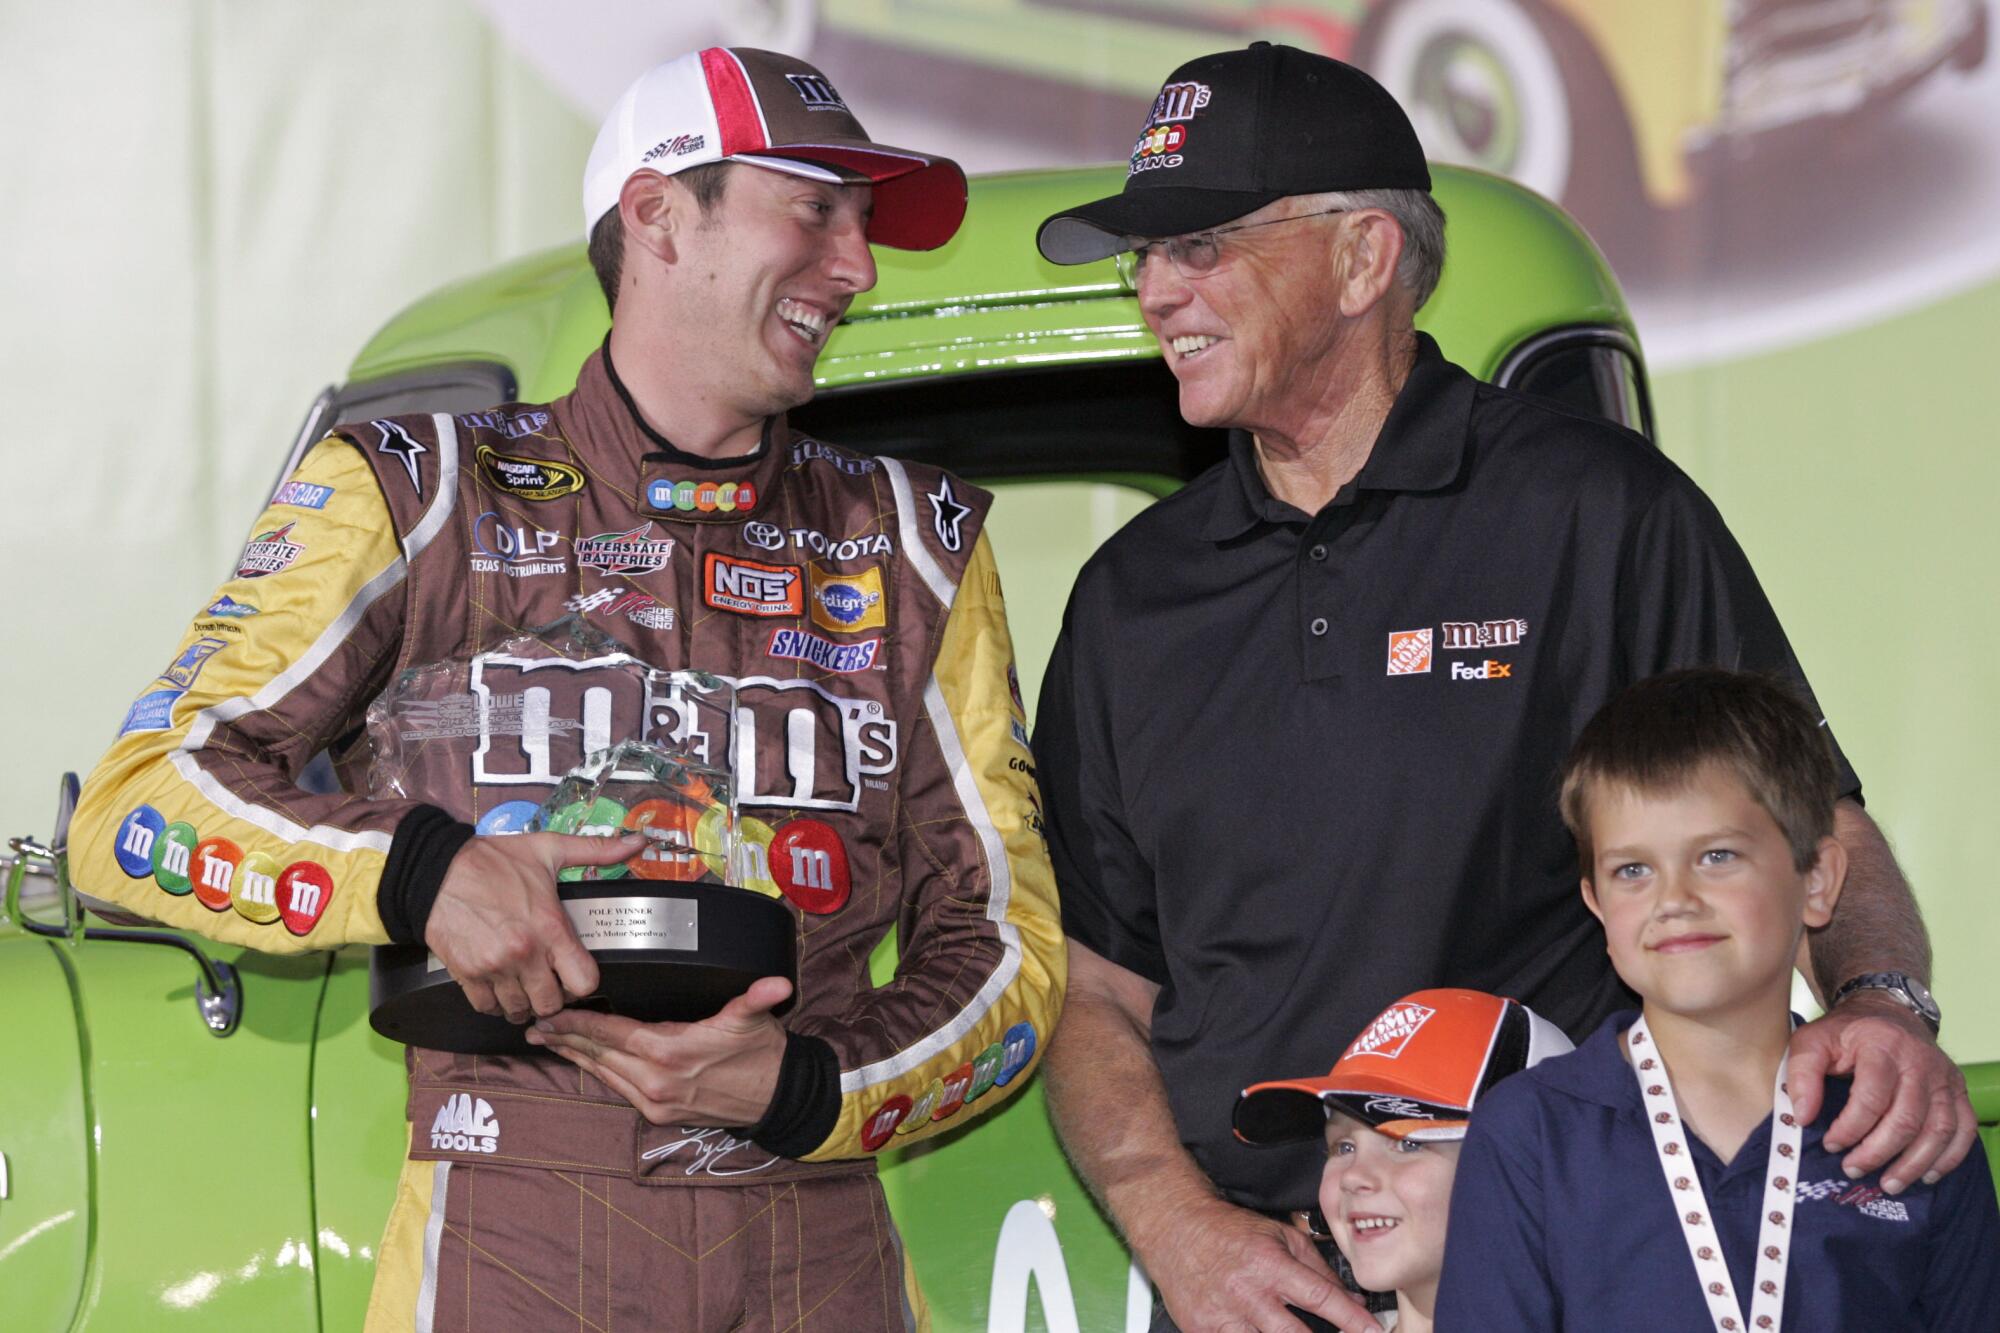 NASCAR driver Kyle Busch holds a trophy and jokes with team owner Joe Gibbs, who is behind two boys.